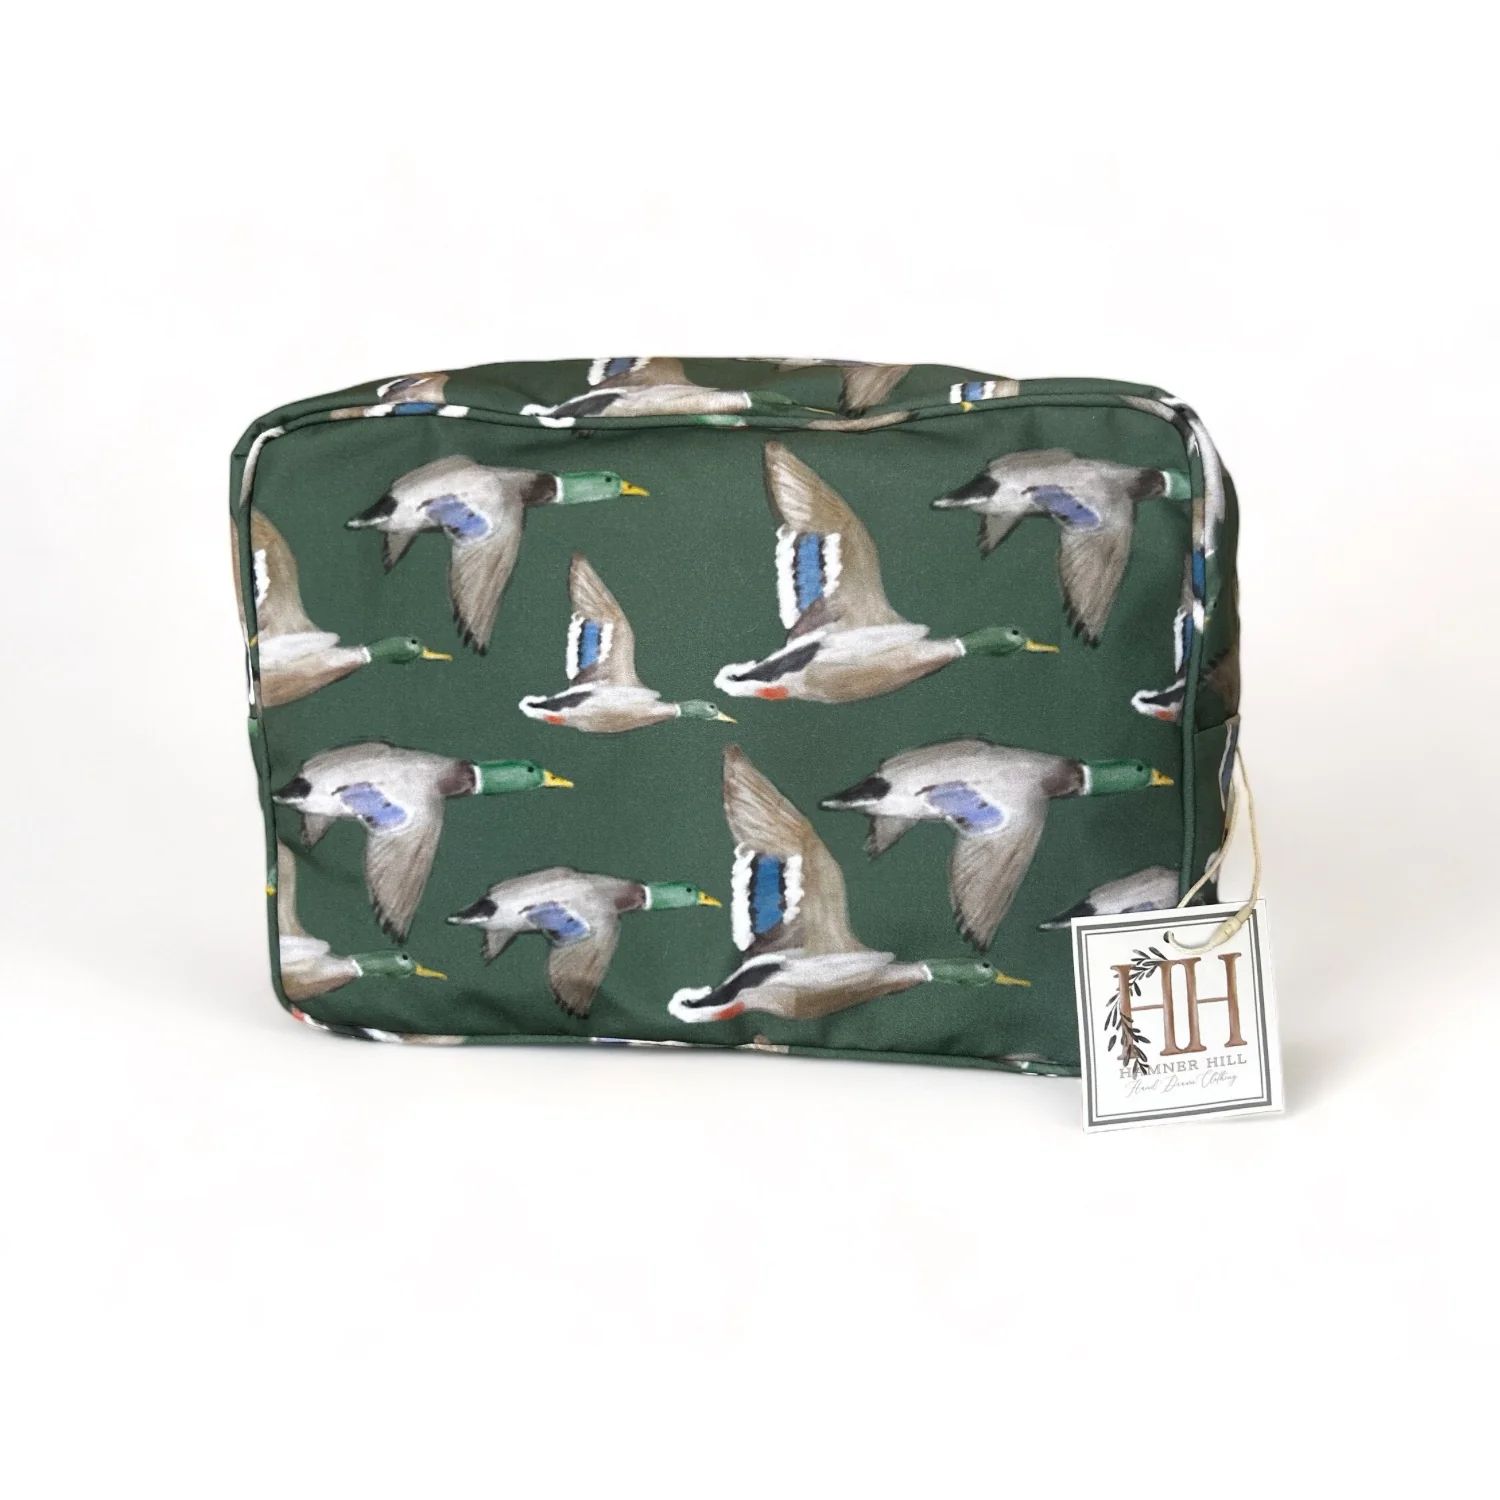 Flyin’ South Travel/Lunch Tote | Hamner Hill